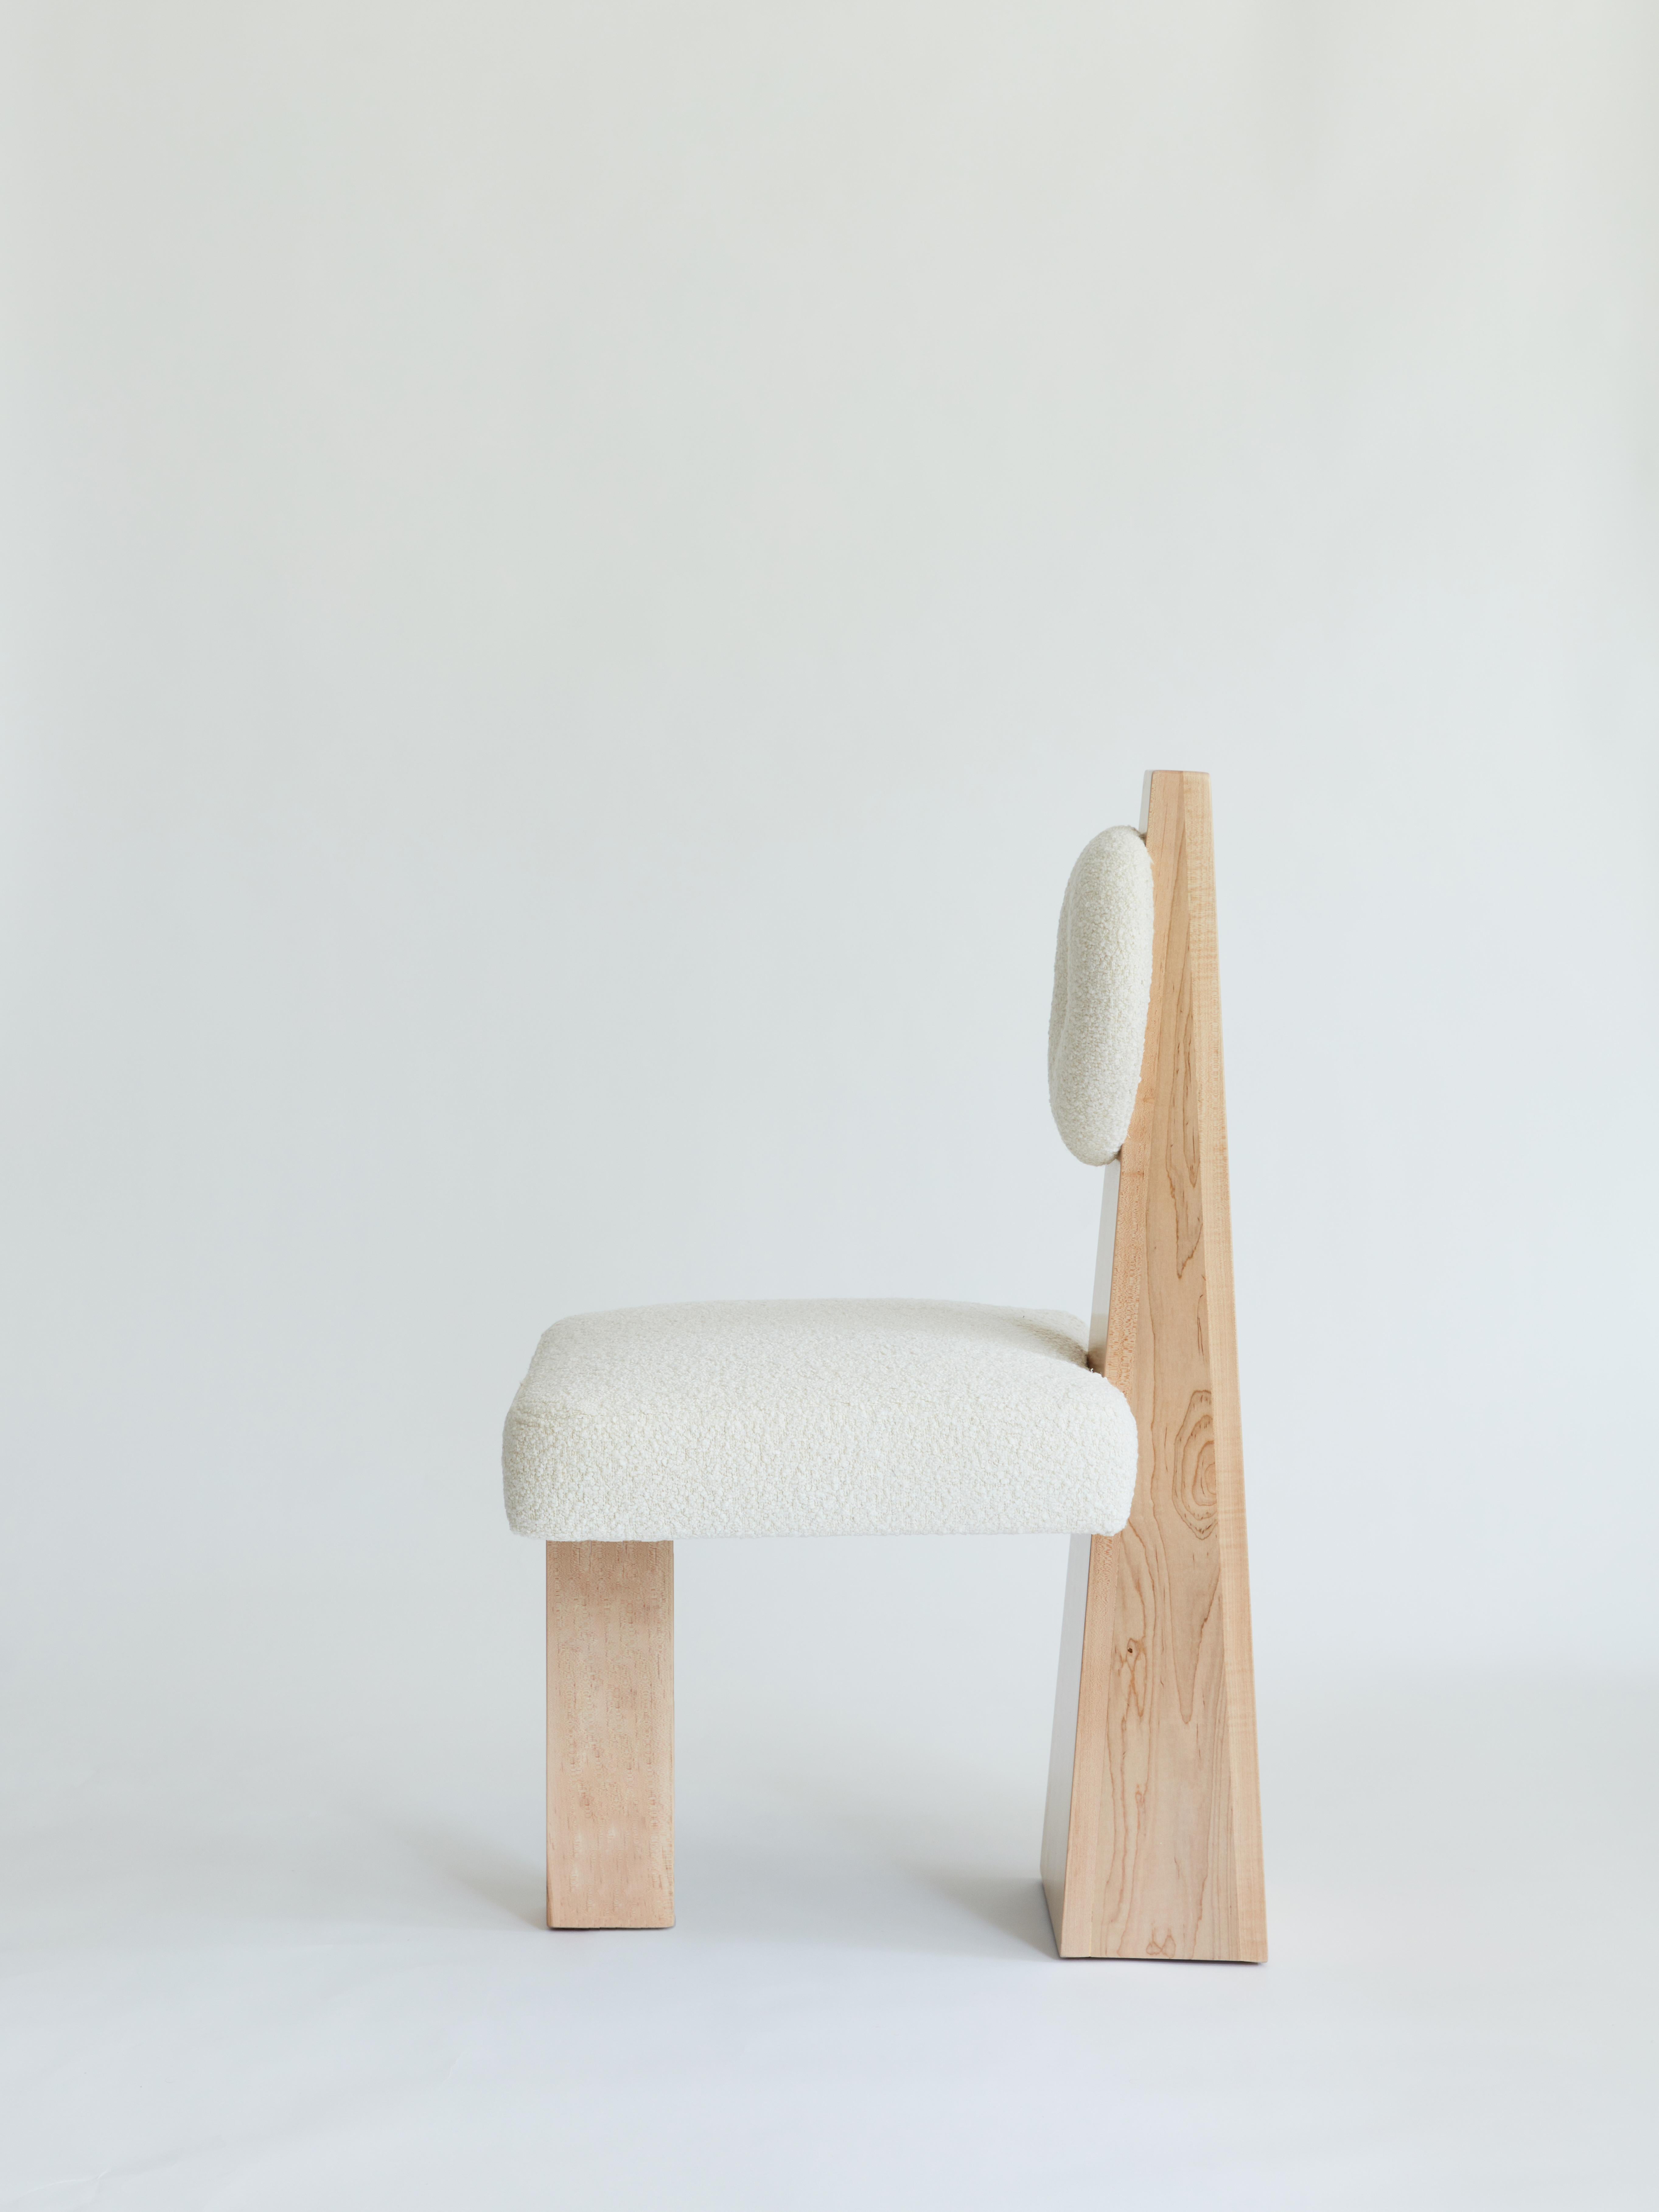 Made to order bouclé and wood chair designed by Christian Siriano.

Base: Natural Maple

Fabric for seat/back cushion: 
Ivory Bouclé

Measures: Overall depth: 28”
Overall height: 40”

Seat depth: 21”
Seat height: 20”
Seat width: